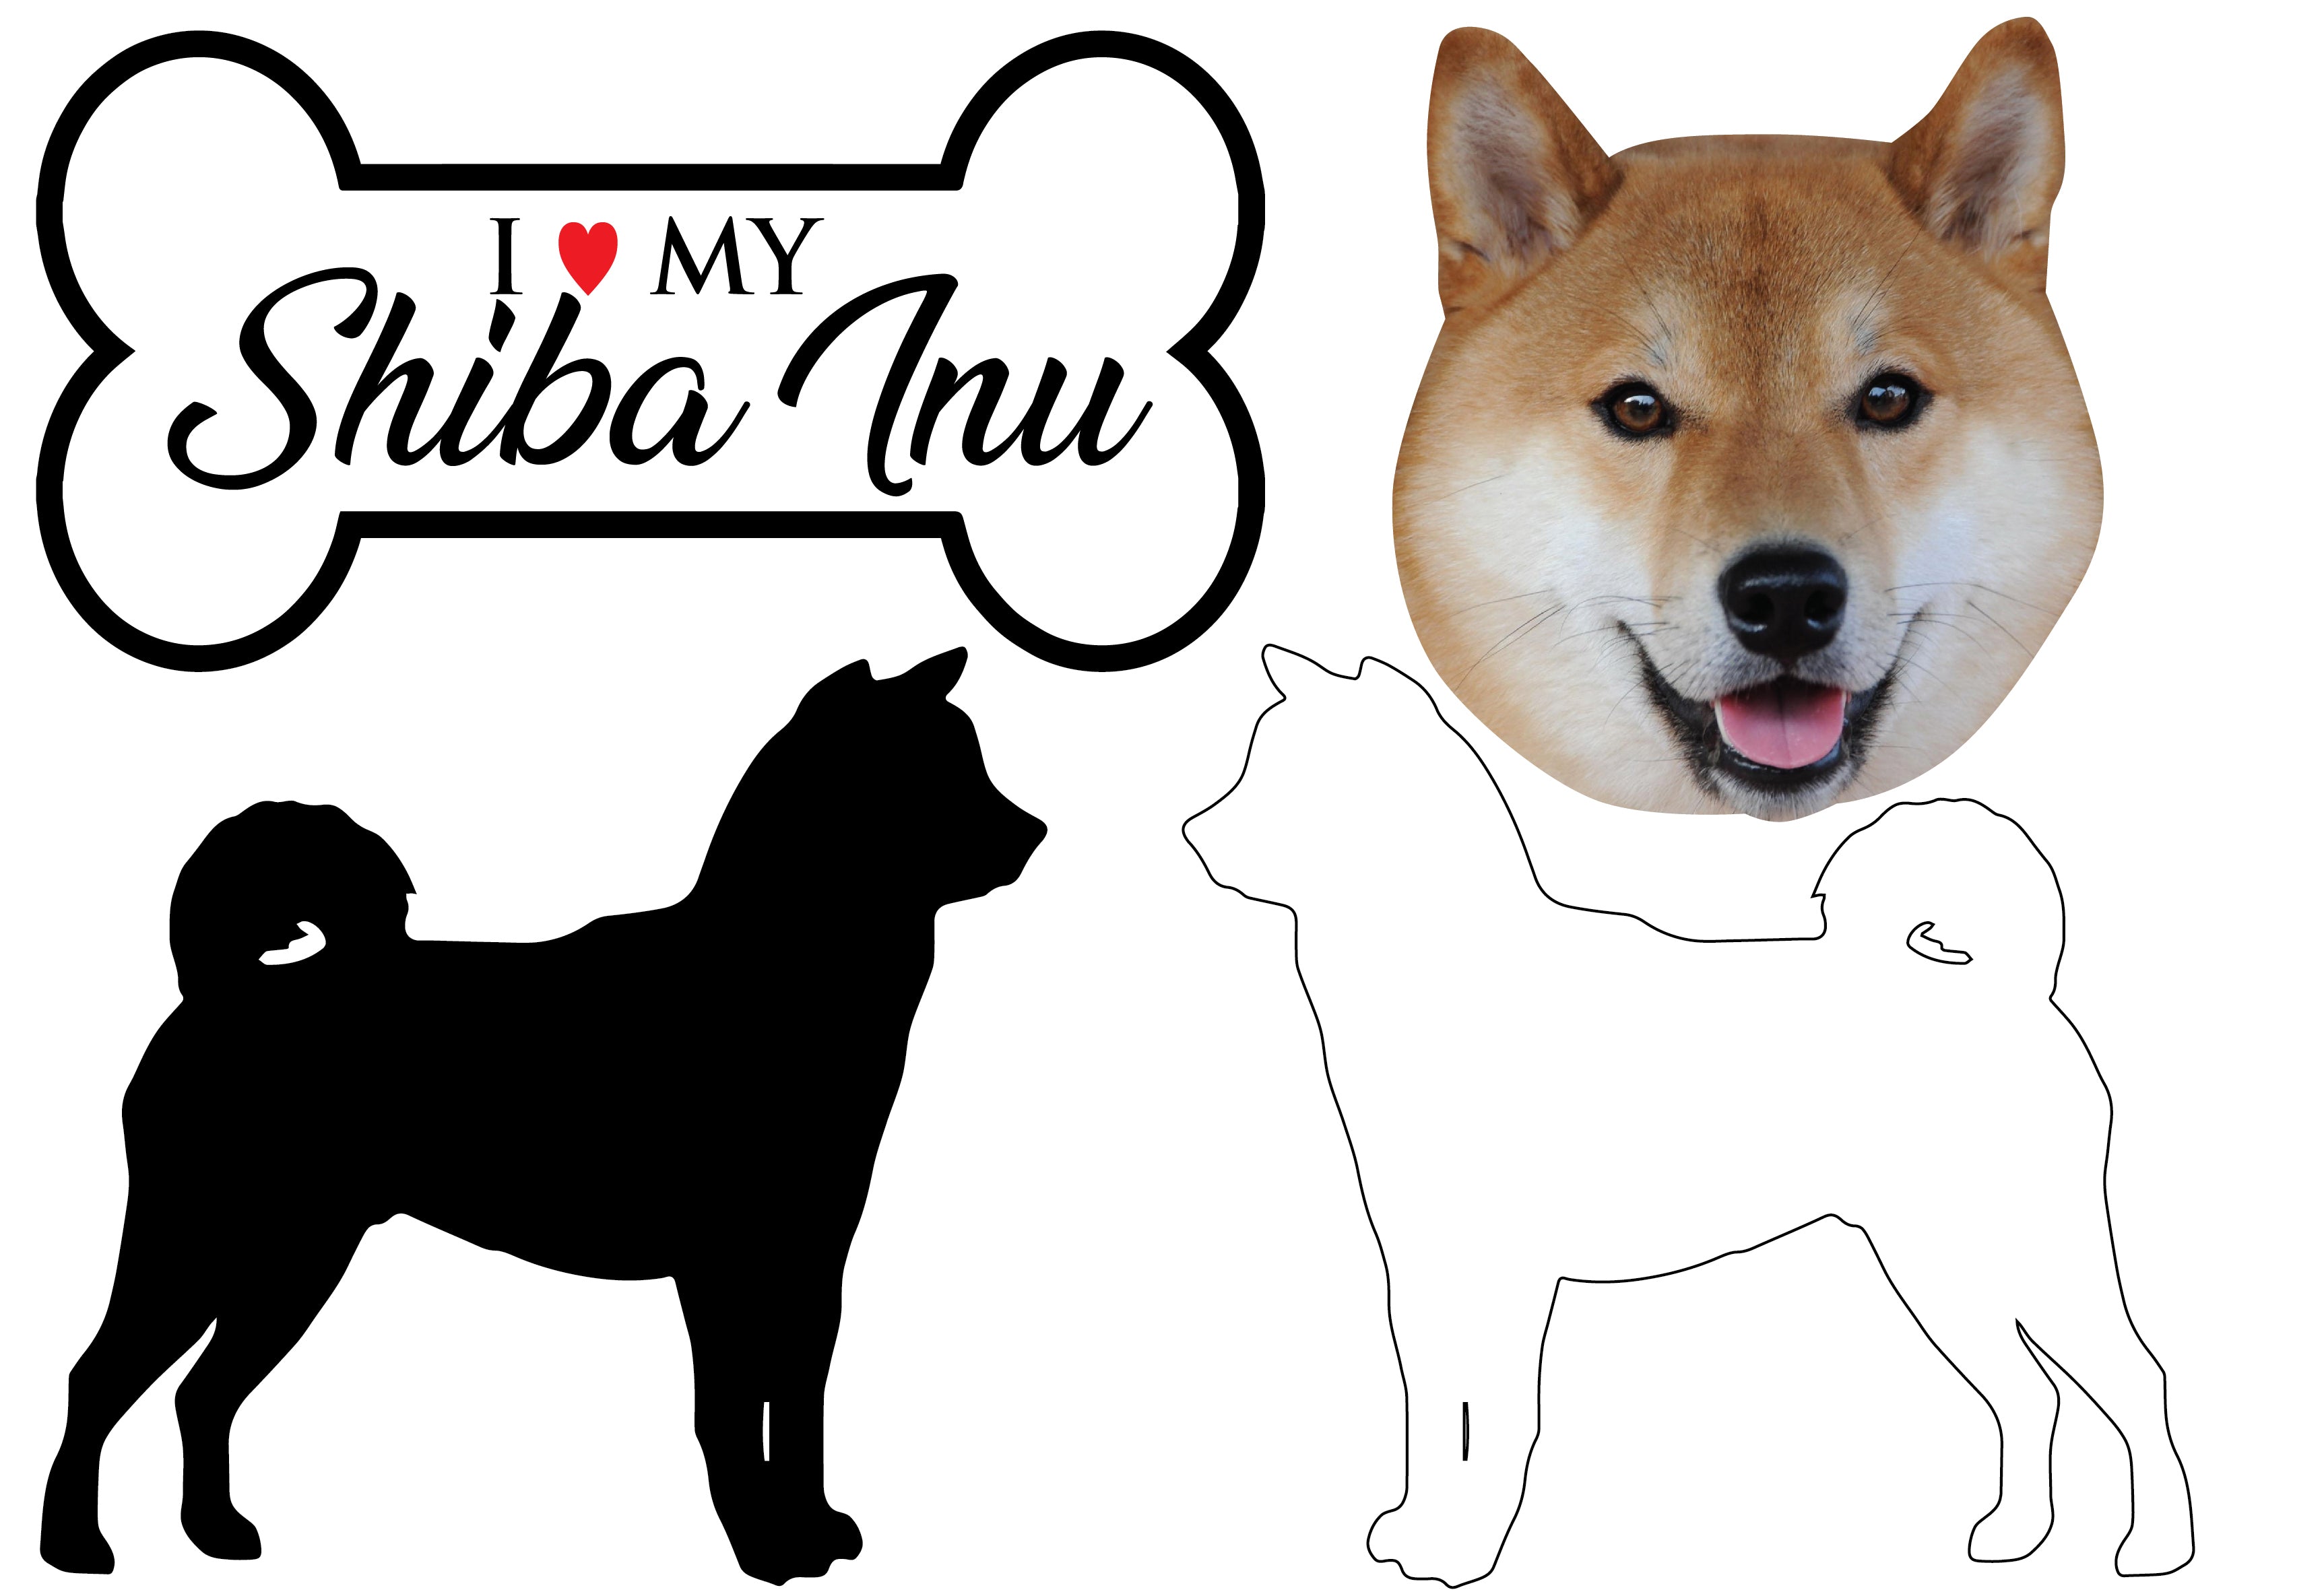 Shiba Inu - Dog Breed Decals (Set of 16) - Sizes in Description